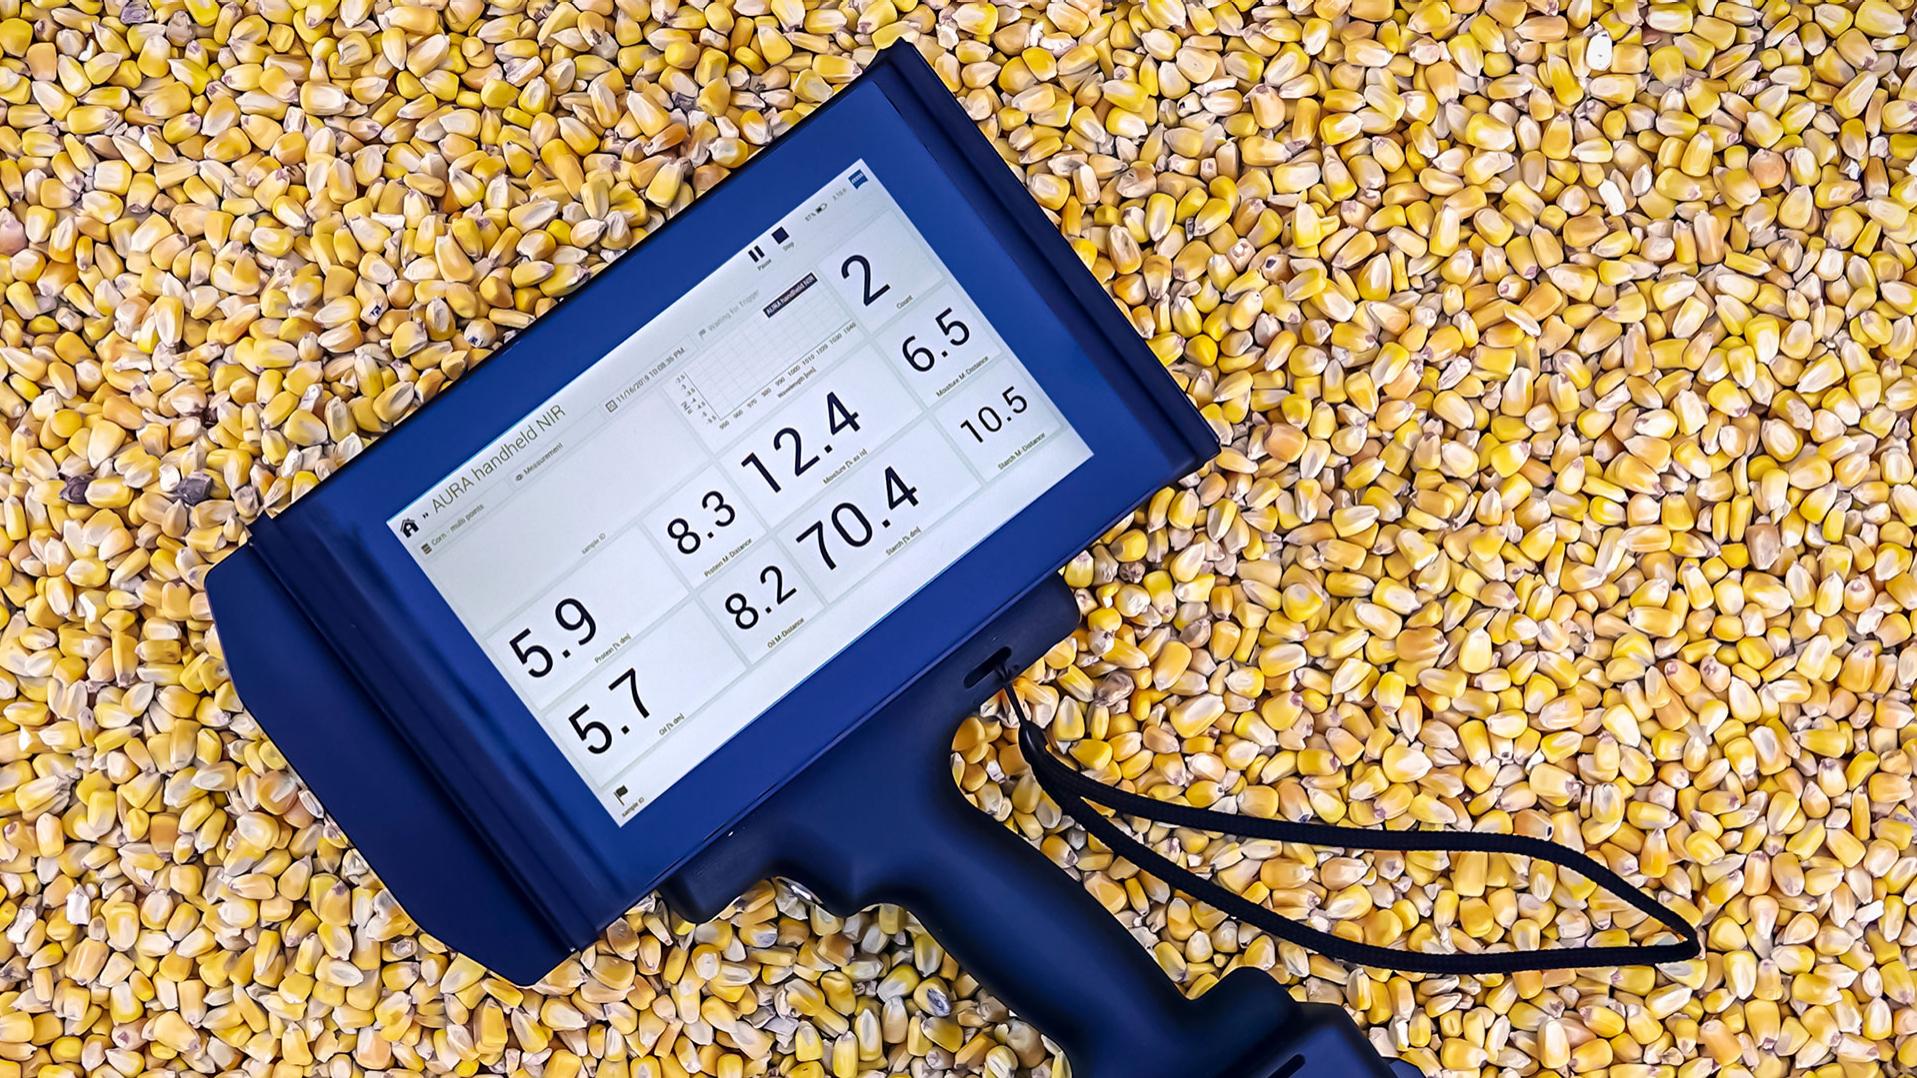 AURA® handheld NIR with InProcess Software showing on display, lying on corn